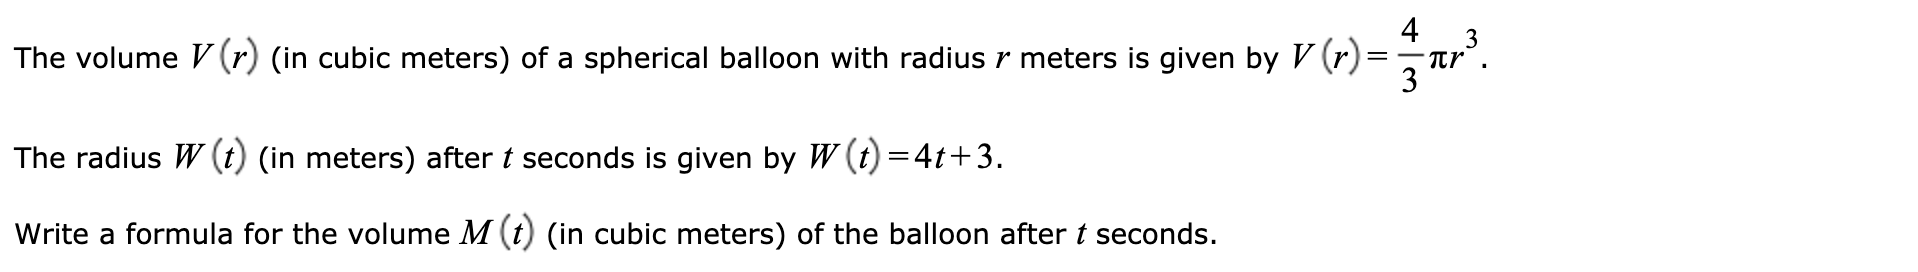 4
The volume V (r) (in cubic meters) of a spherical balloon with radius r meters is given by V (r)=
The radius W (t) (in meters) after t seconds is given by W (t) =4t+3.
Write a formula for the volume M (t) (in cubic meters) of the balloon after t seconds.
